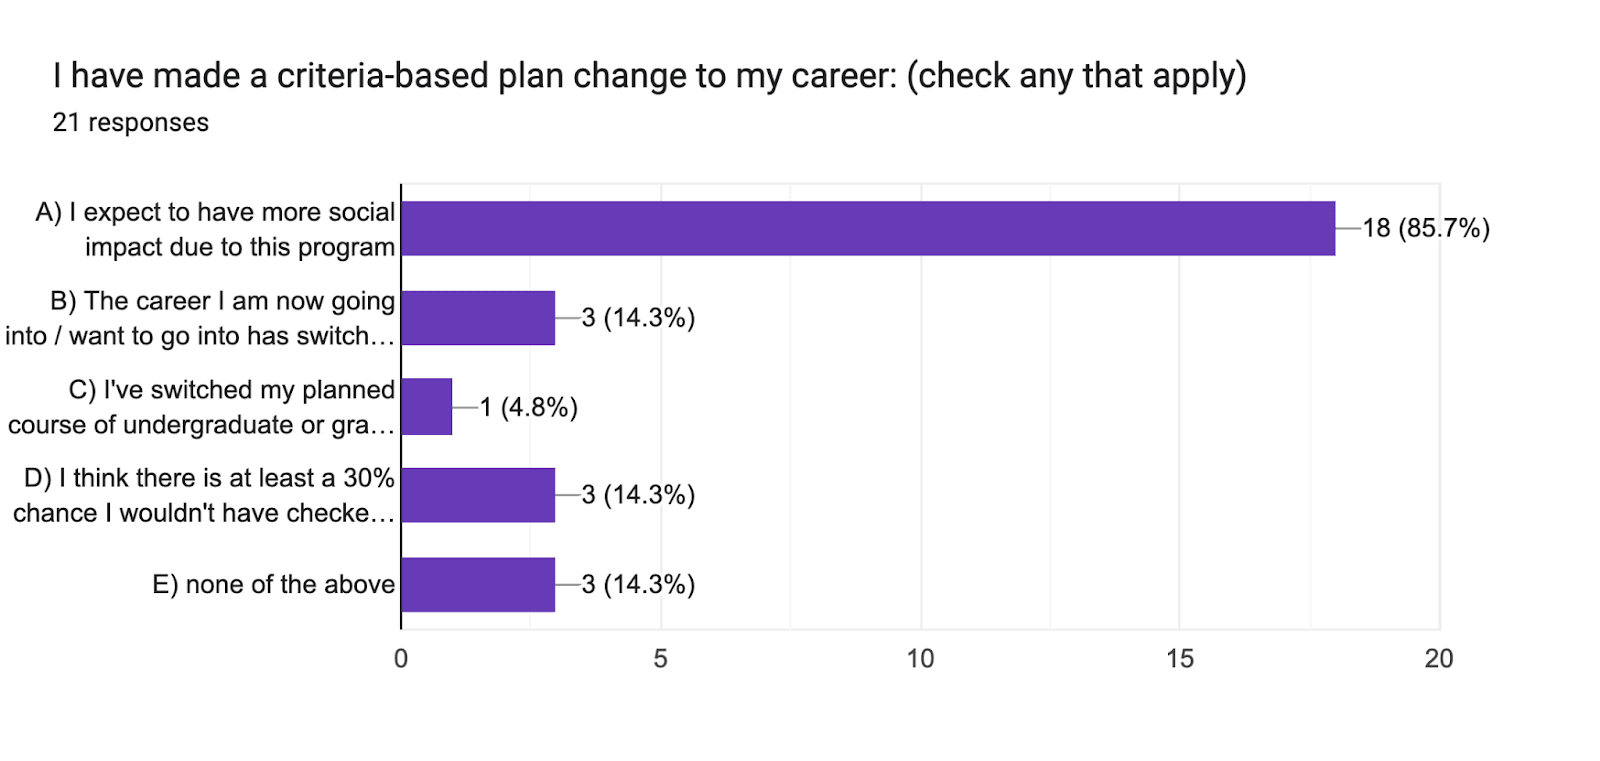 Forms response chart. Question title: I have made a criteria-based plan change to my career: (check any that apply)
. Number of responses: 21 responses.